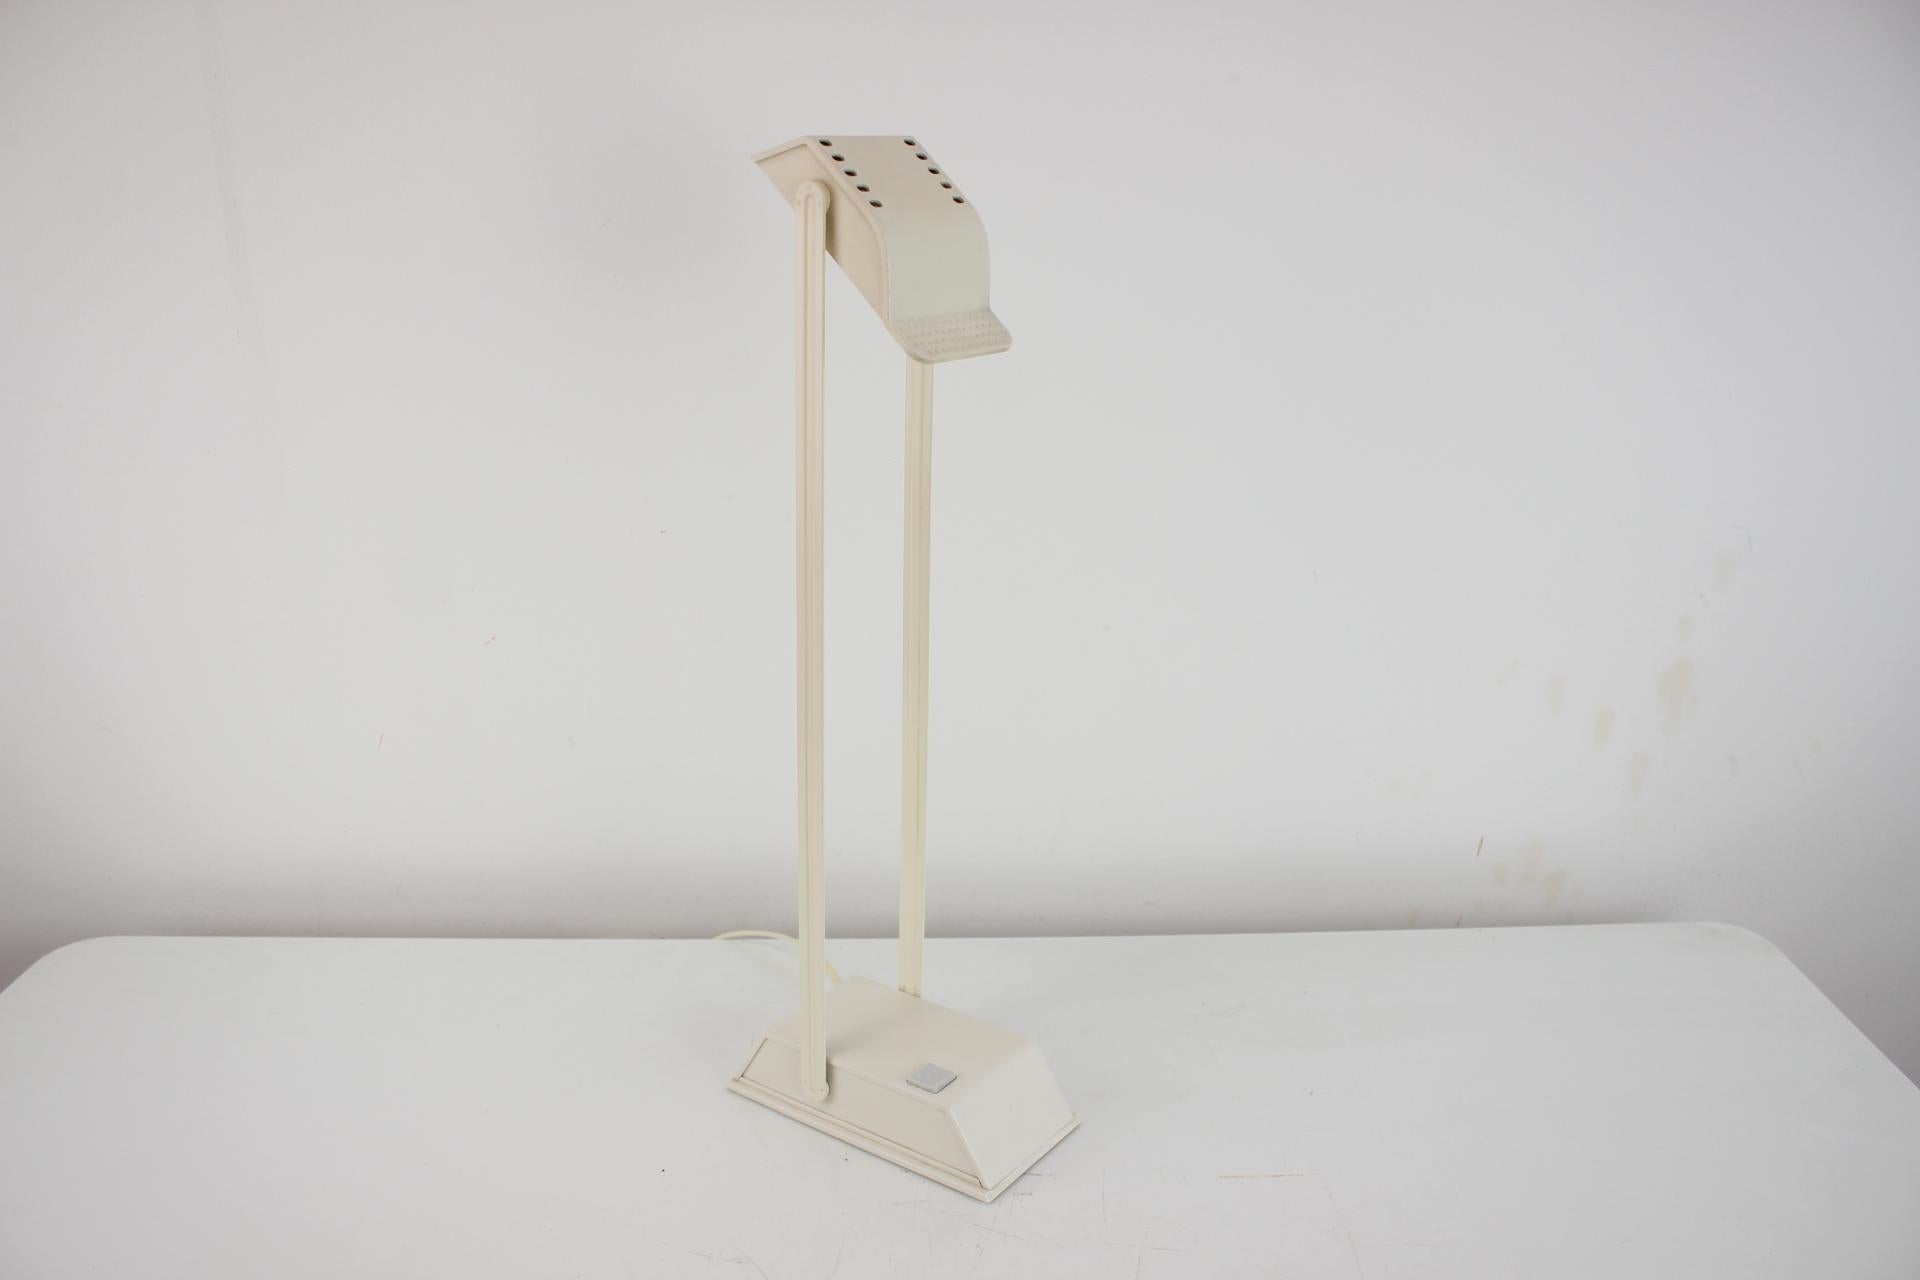 Halostar 50 Table or Wall Lamp by Osram, Germany 1980s For Sale 2